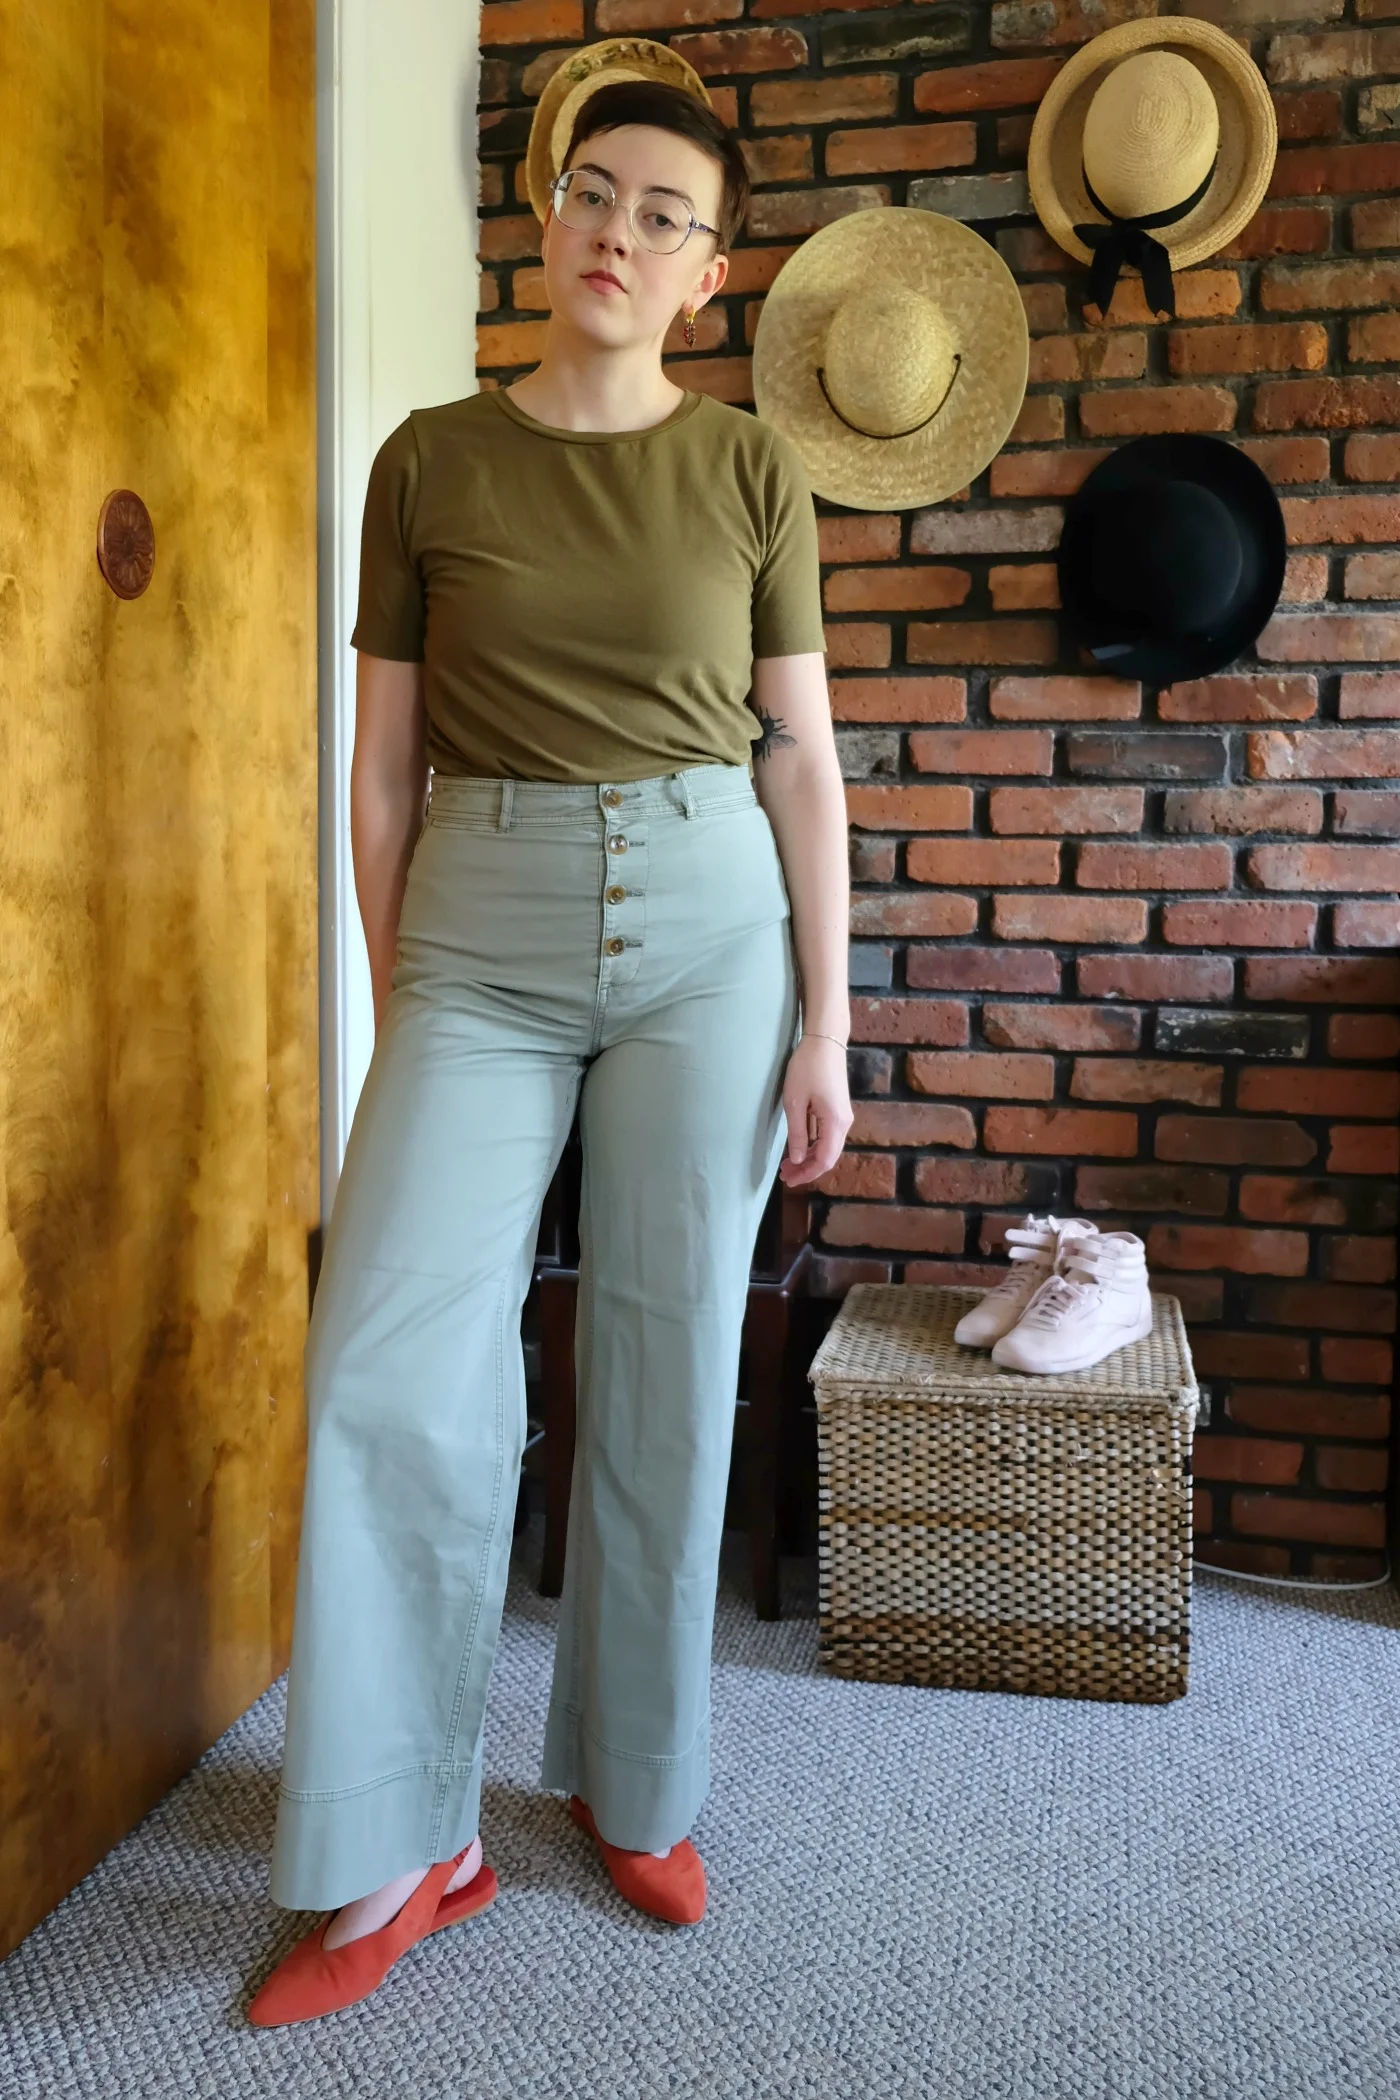  Details: T-shirt -  Universal Standard ; Pants - Lightweight Button-Fly Wide Leg Chino c/o  Everlane ; Shoes -  Everlane  (no longer available -  other colors ); Earring - Repeller 